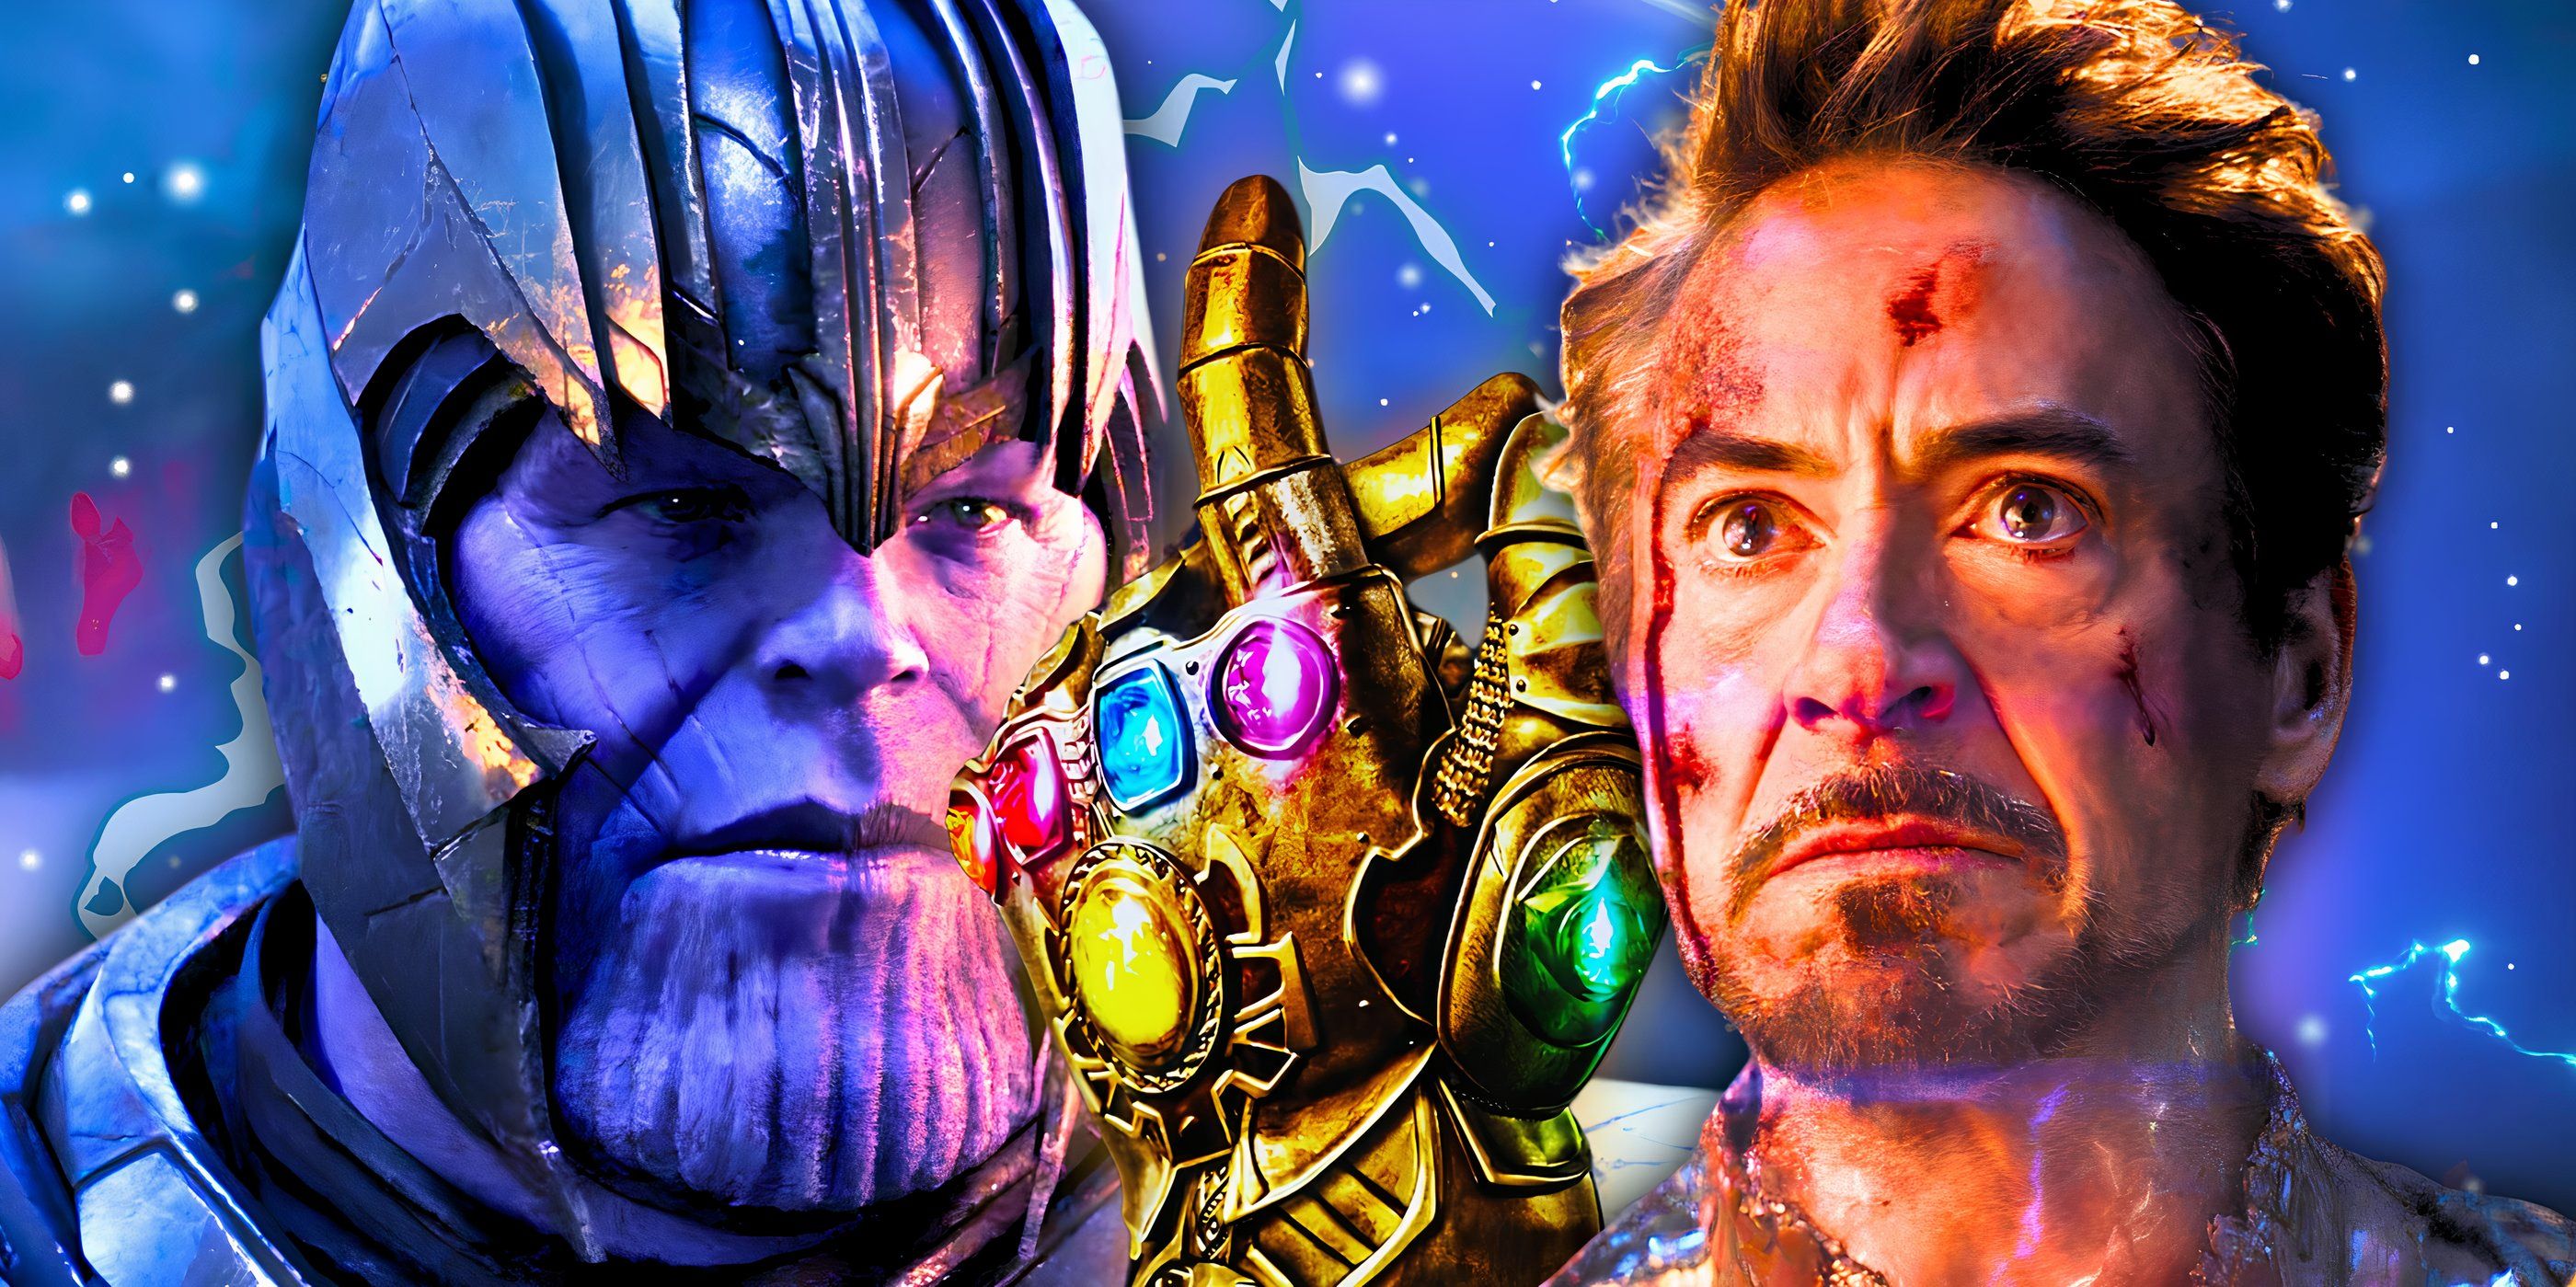 Split image of Iron Man and Thanos in Avengers: Endgame with the Infinity Gauntlet in the center